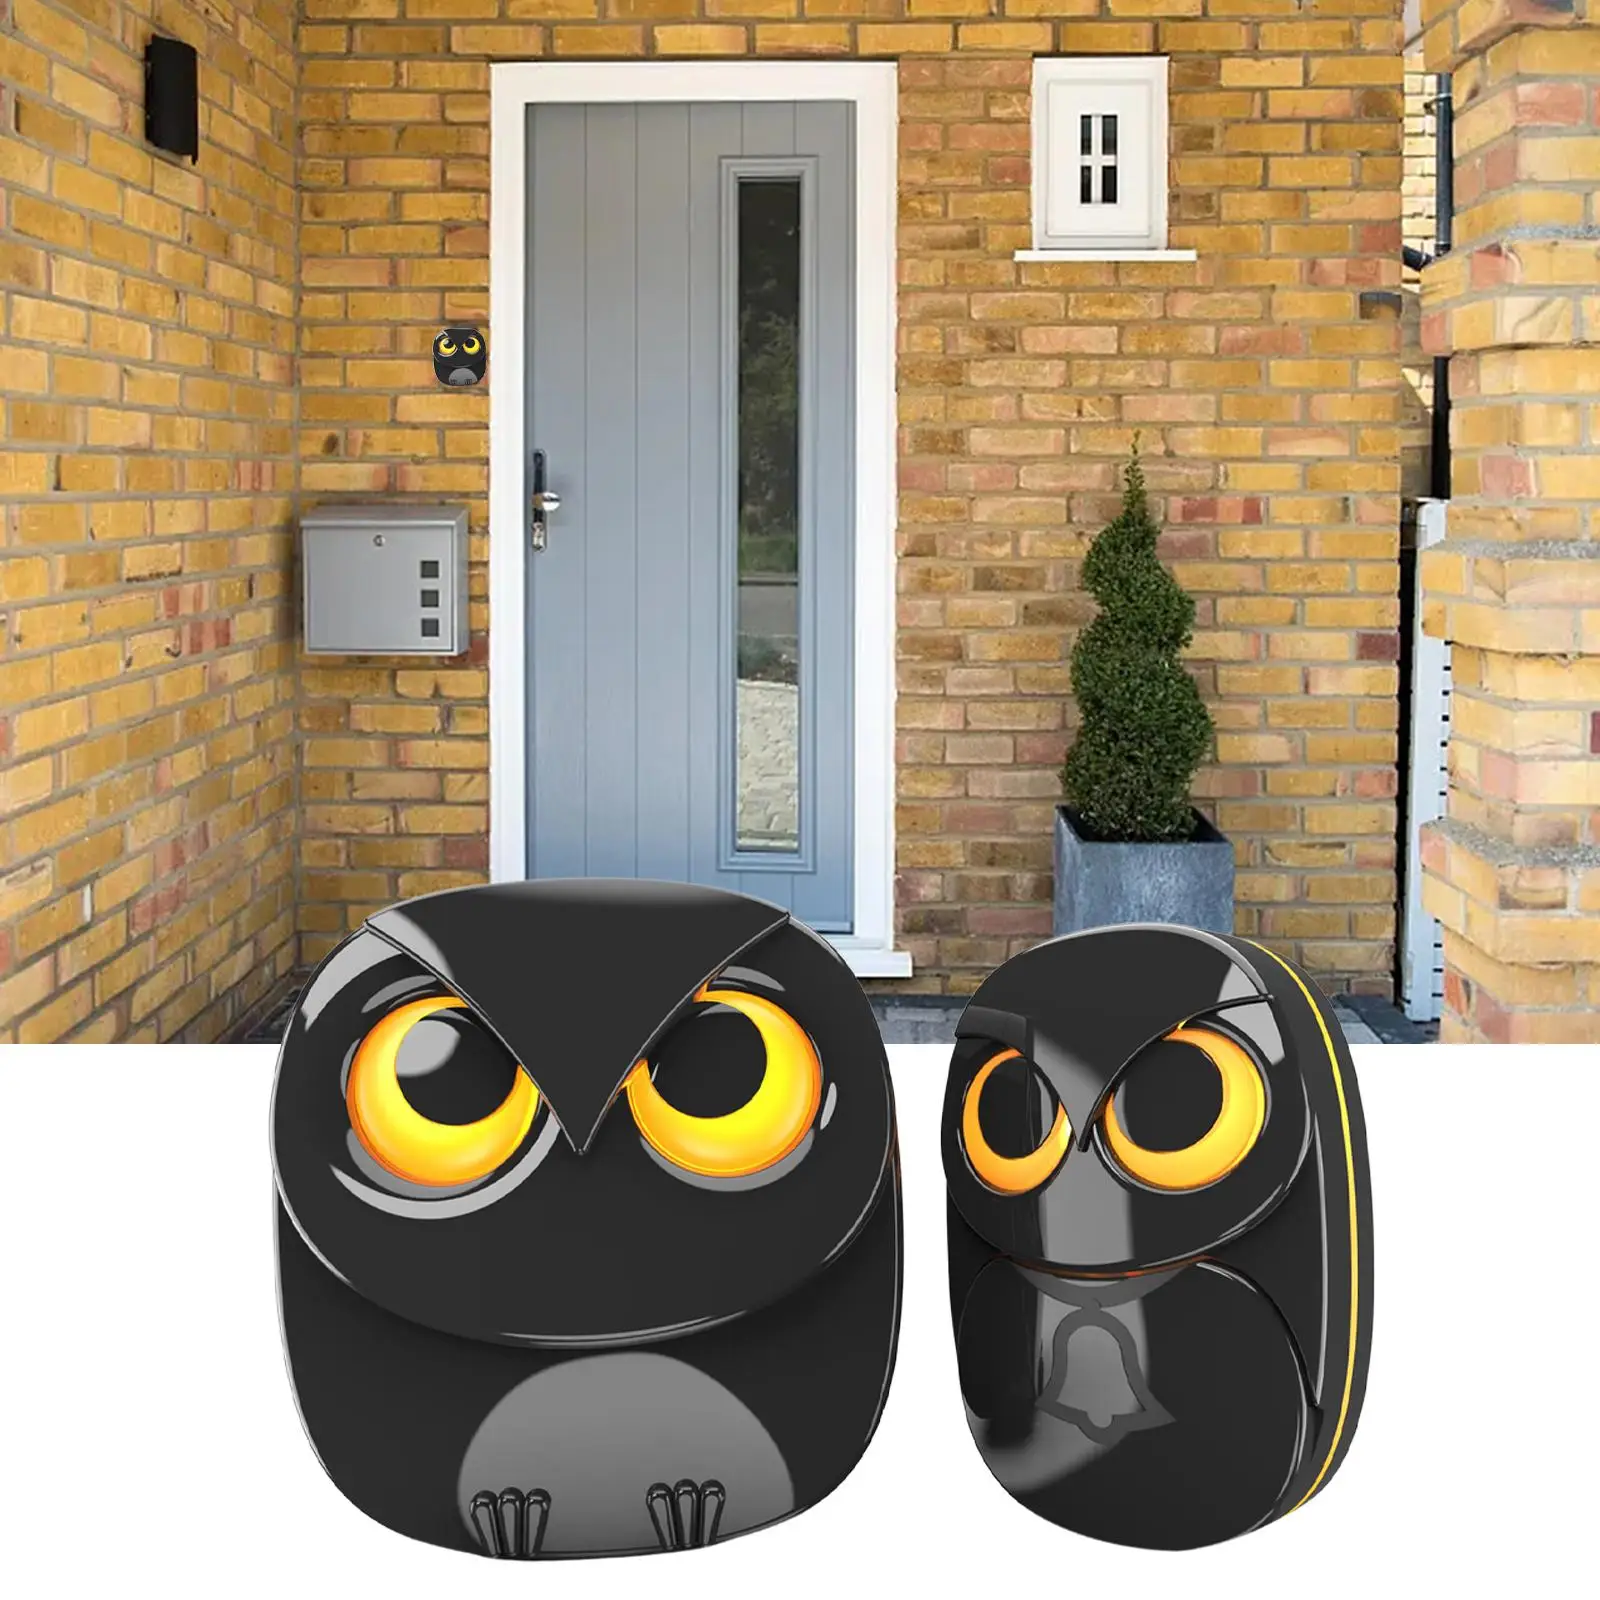 Wireless Driveway Security Alarm Creative Simple to Use Devices Multipurpose Owl Shape for Gate Shed Home Outside US Plug